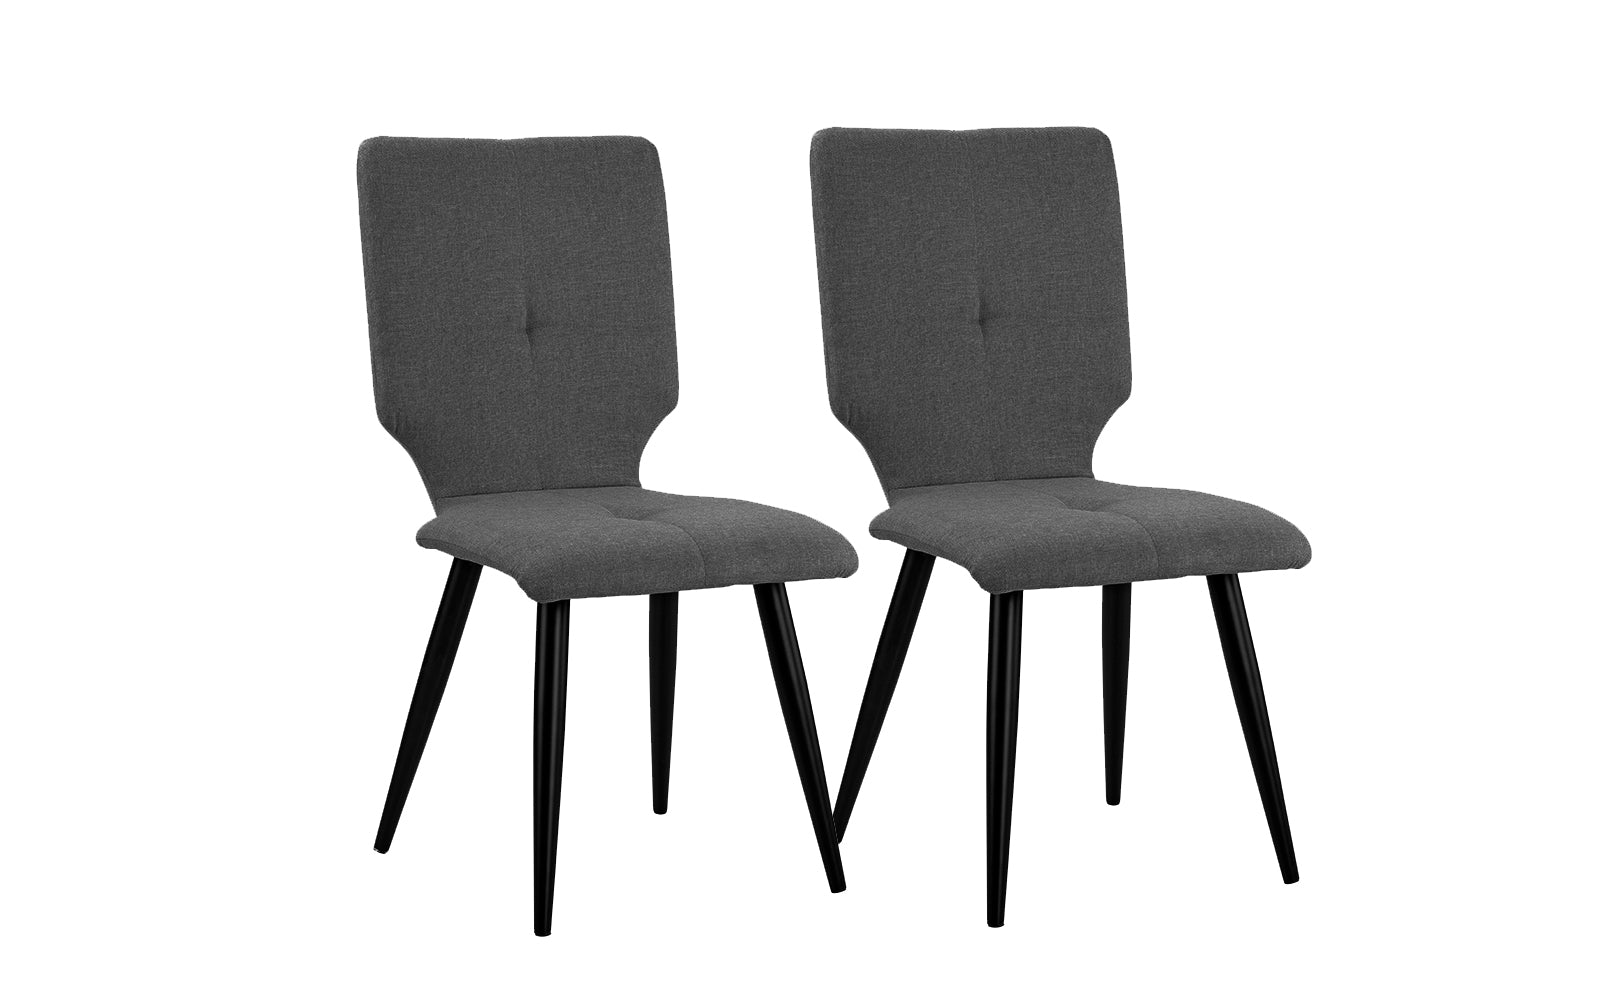 Ava Set of (2) Modern Upholstered Dining Chairs